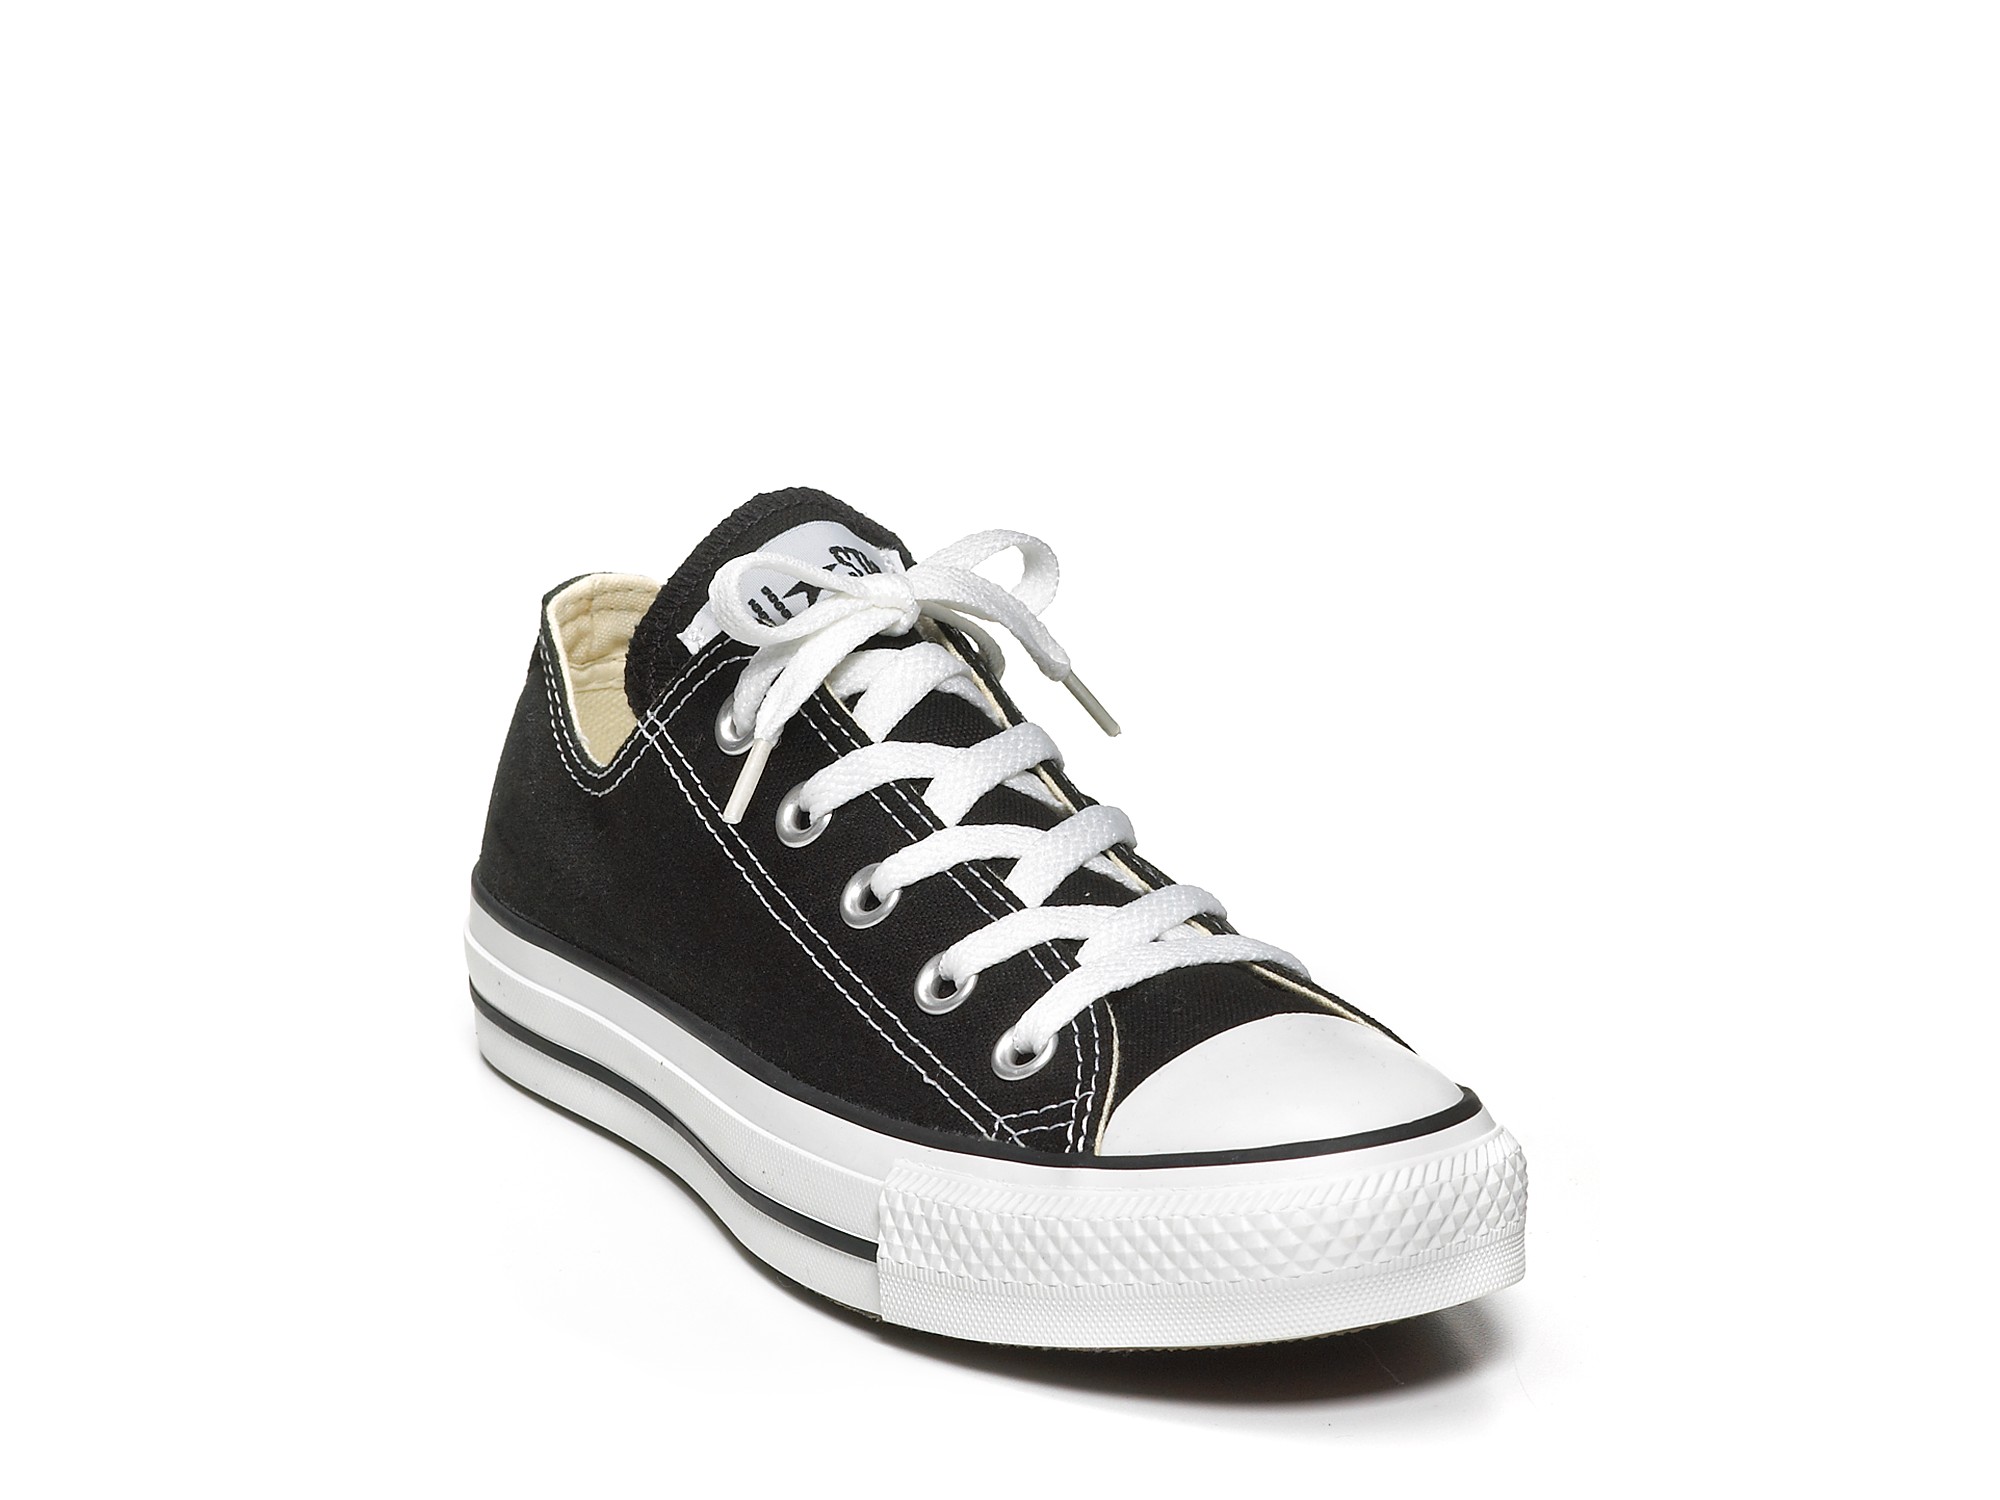 Converse Chucktaylor All Stars Oxford Sneakers in Black | Lyst